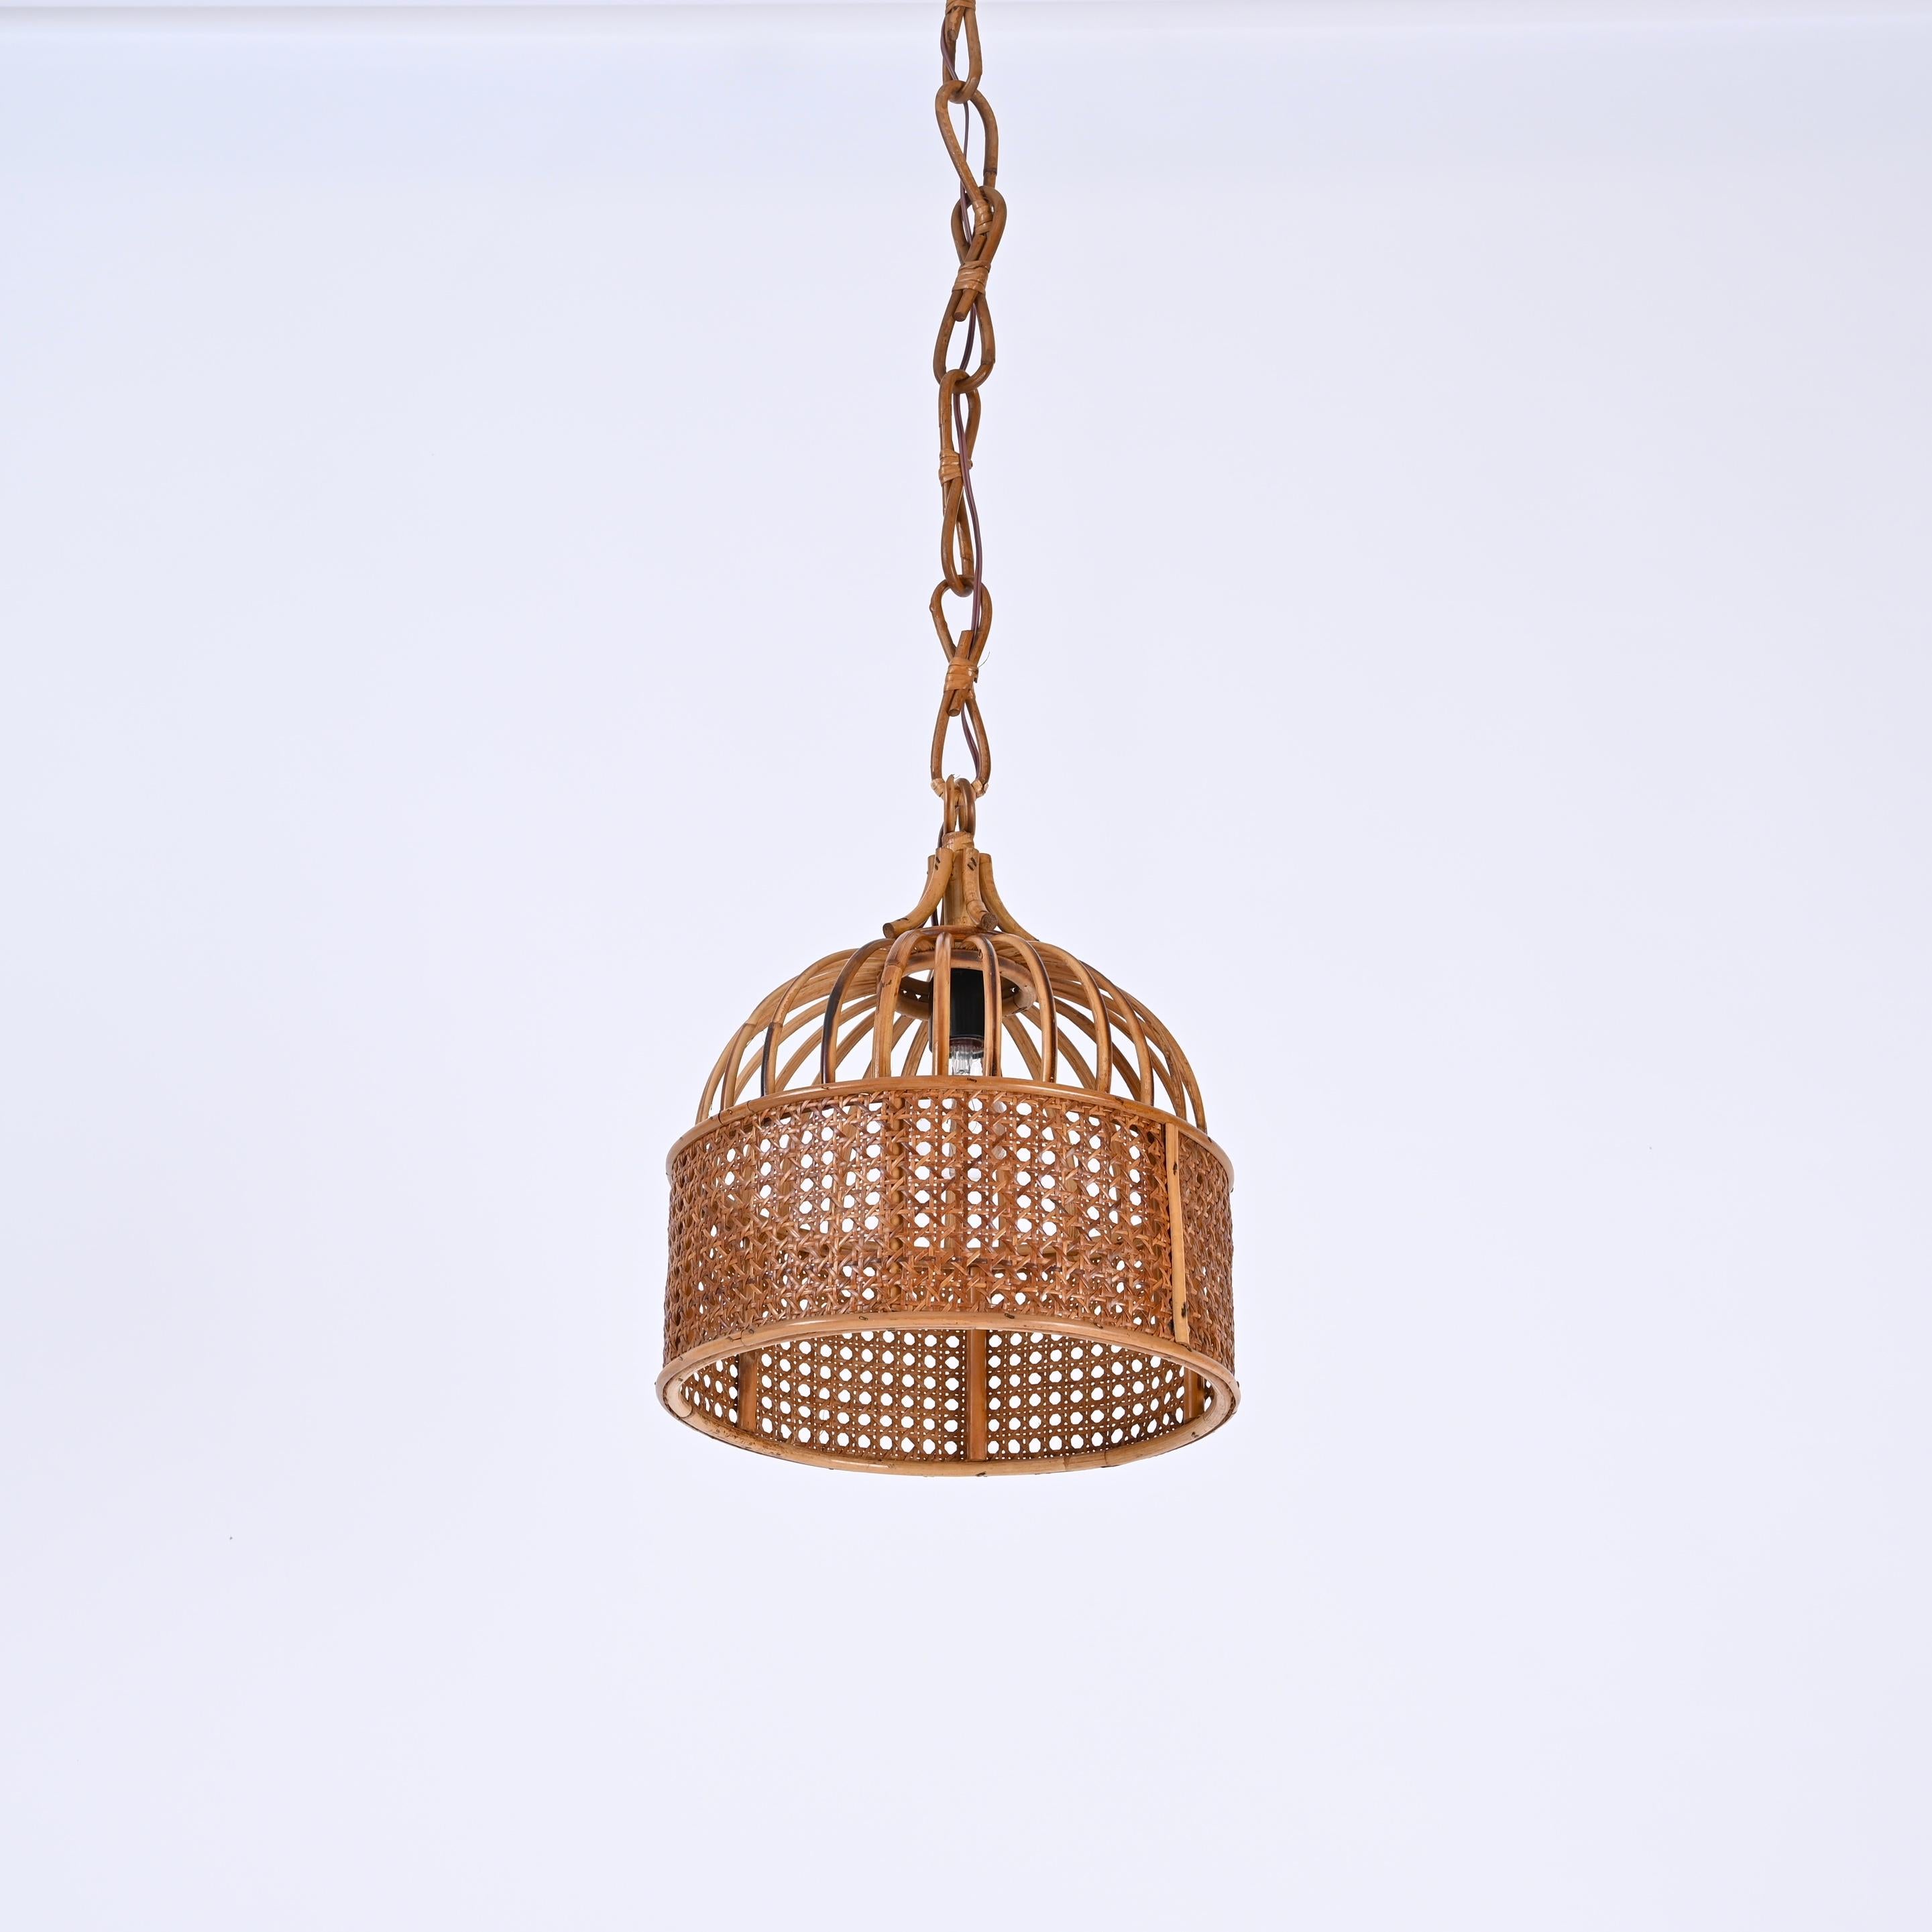 Hand-Woven Midcentury French Riviera Round Pendant in Rattan and Wicker, Italy 1970s For Sale